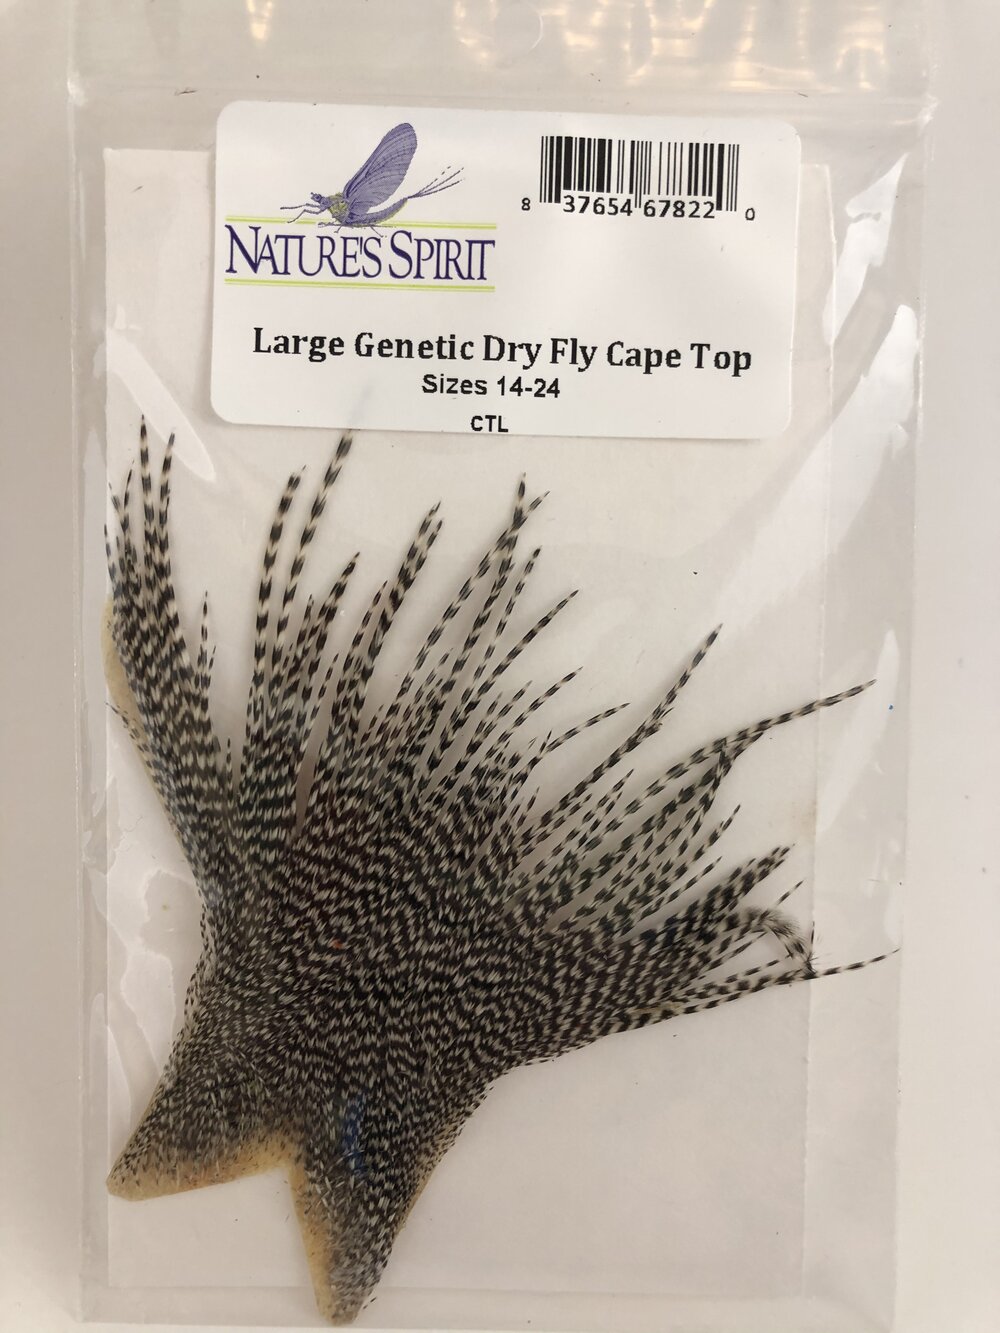 Nature's Spirit Large Genetic Dry Fly Cape Top